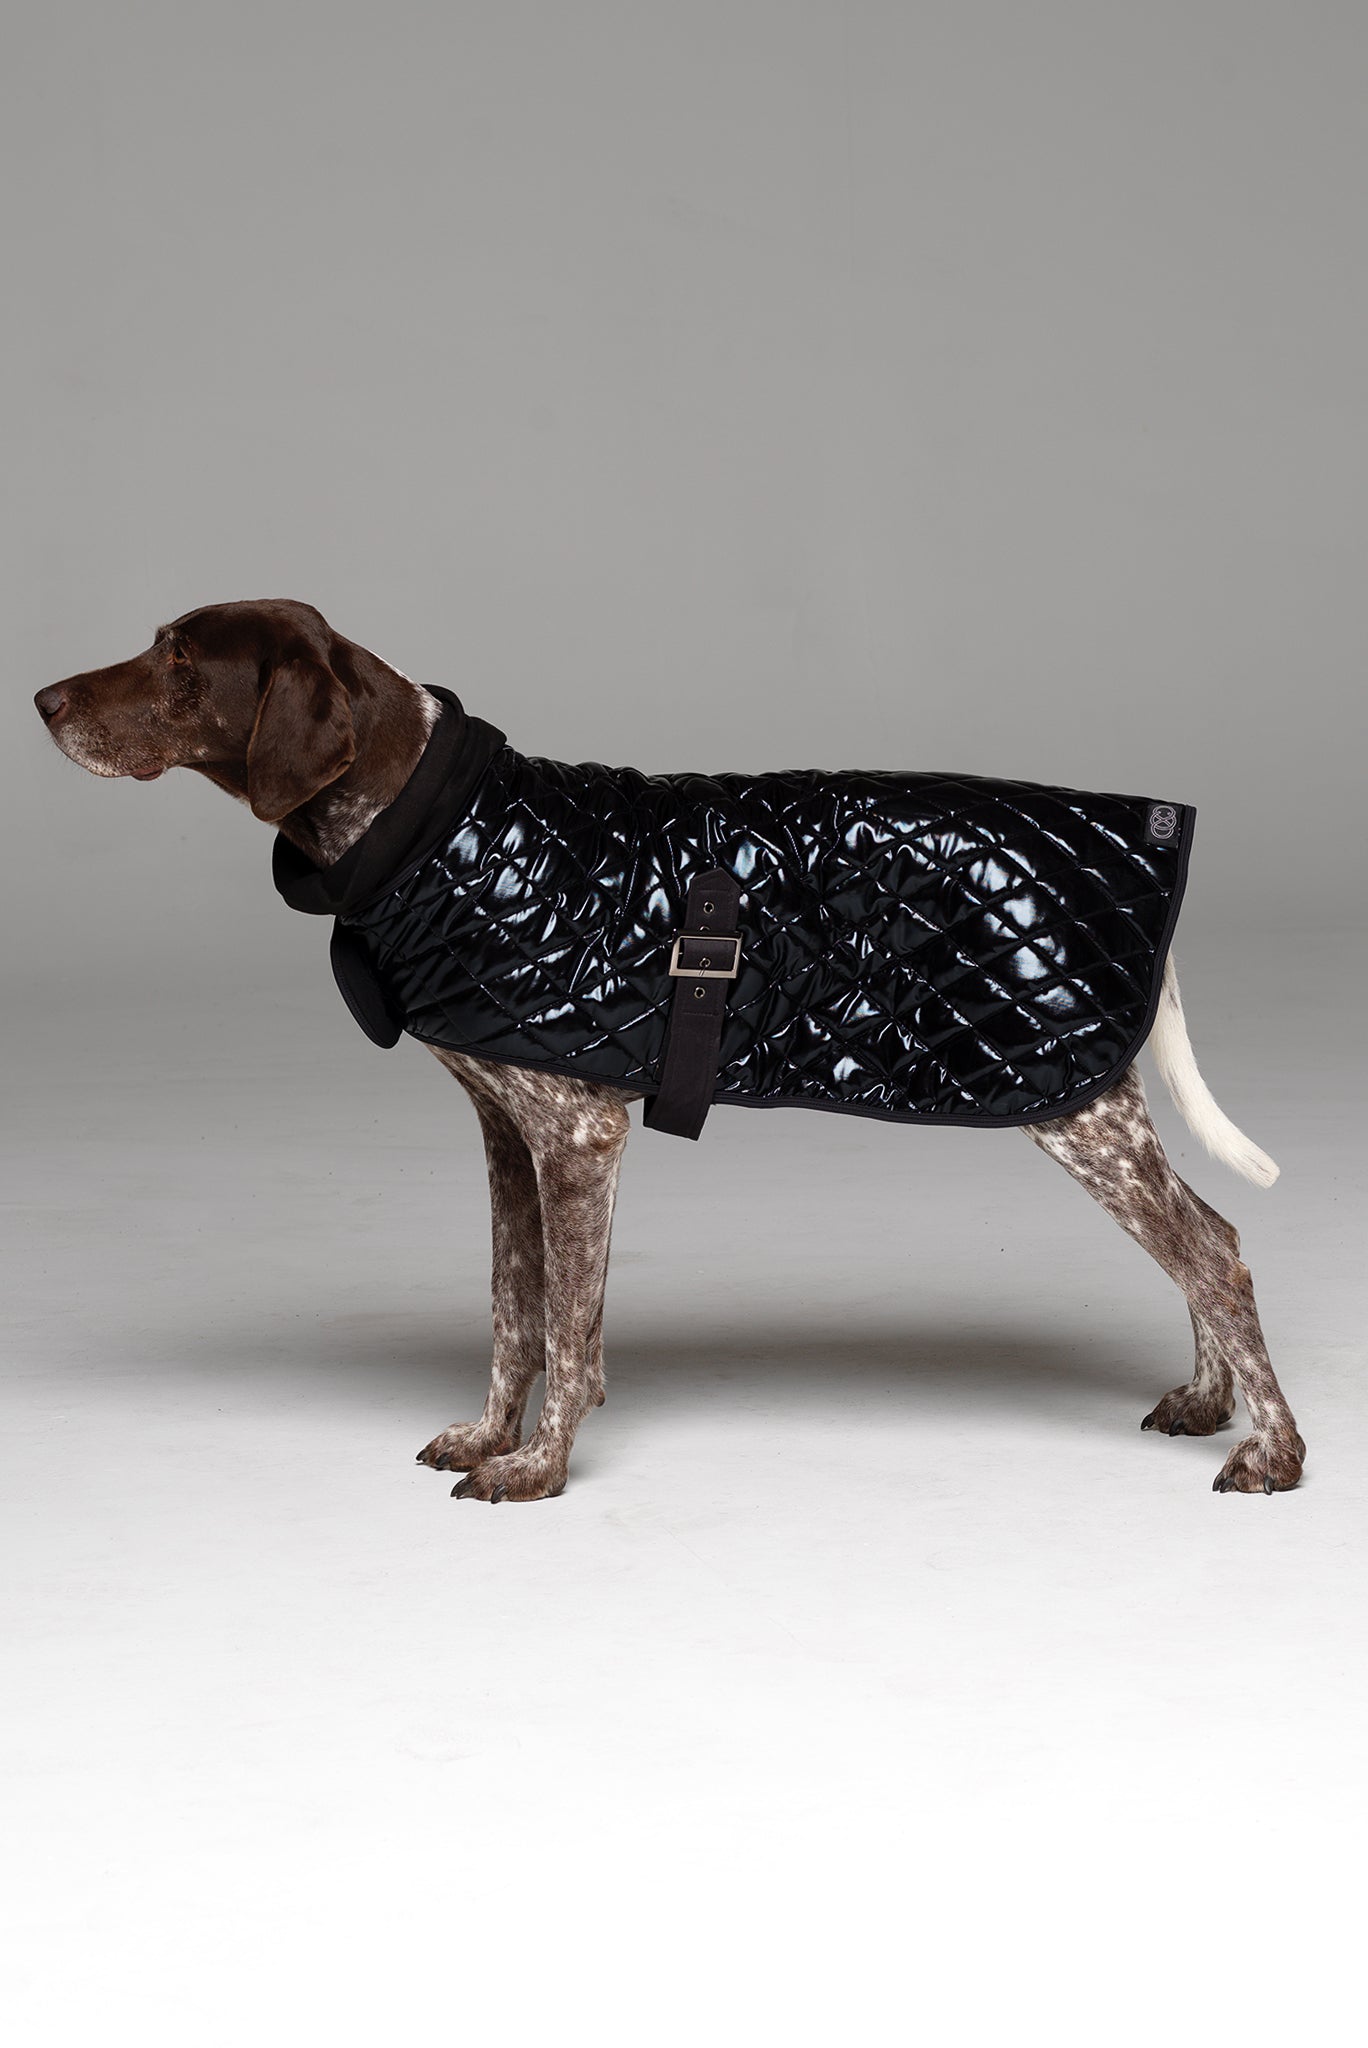 Alpha Dog Coat side profile showing buckle under belly and snood scarf.